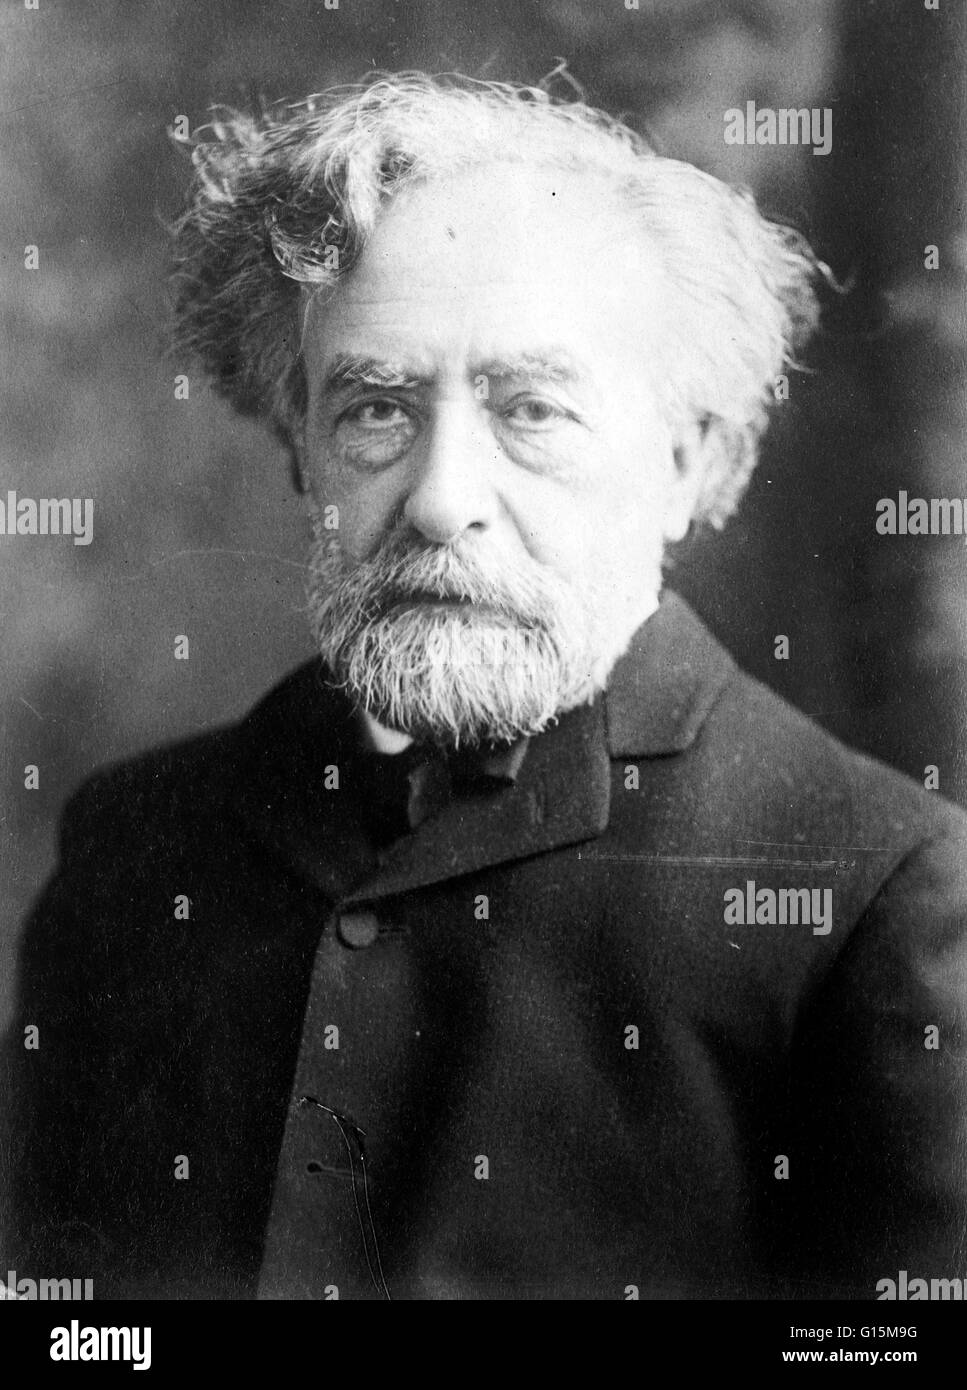 Abraham Jacobi (1830-1919) was a pioneer of pediatrics, opening the first children's clinic in the United States. To date, he is the only foreign born president of the American Medical Association. Civic work was an important part of his life. He advocate Stock Photo